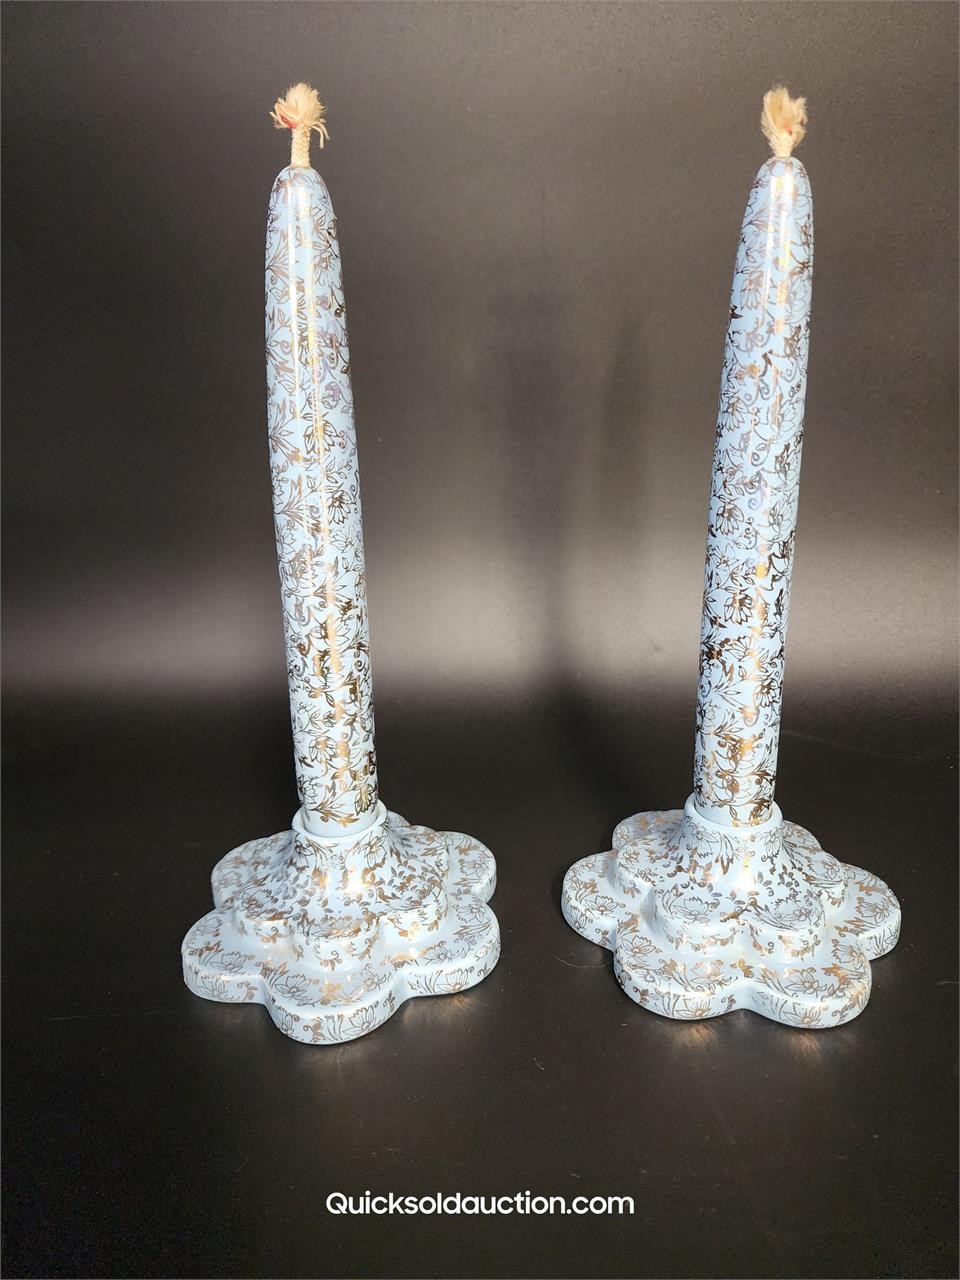 Wade Everlasting Candles In Holders England